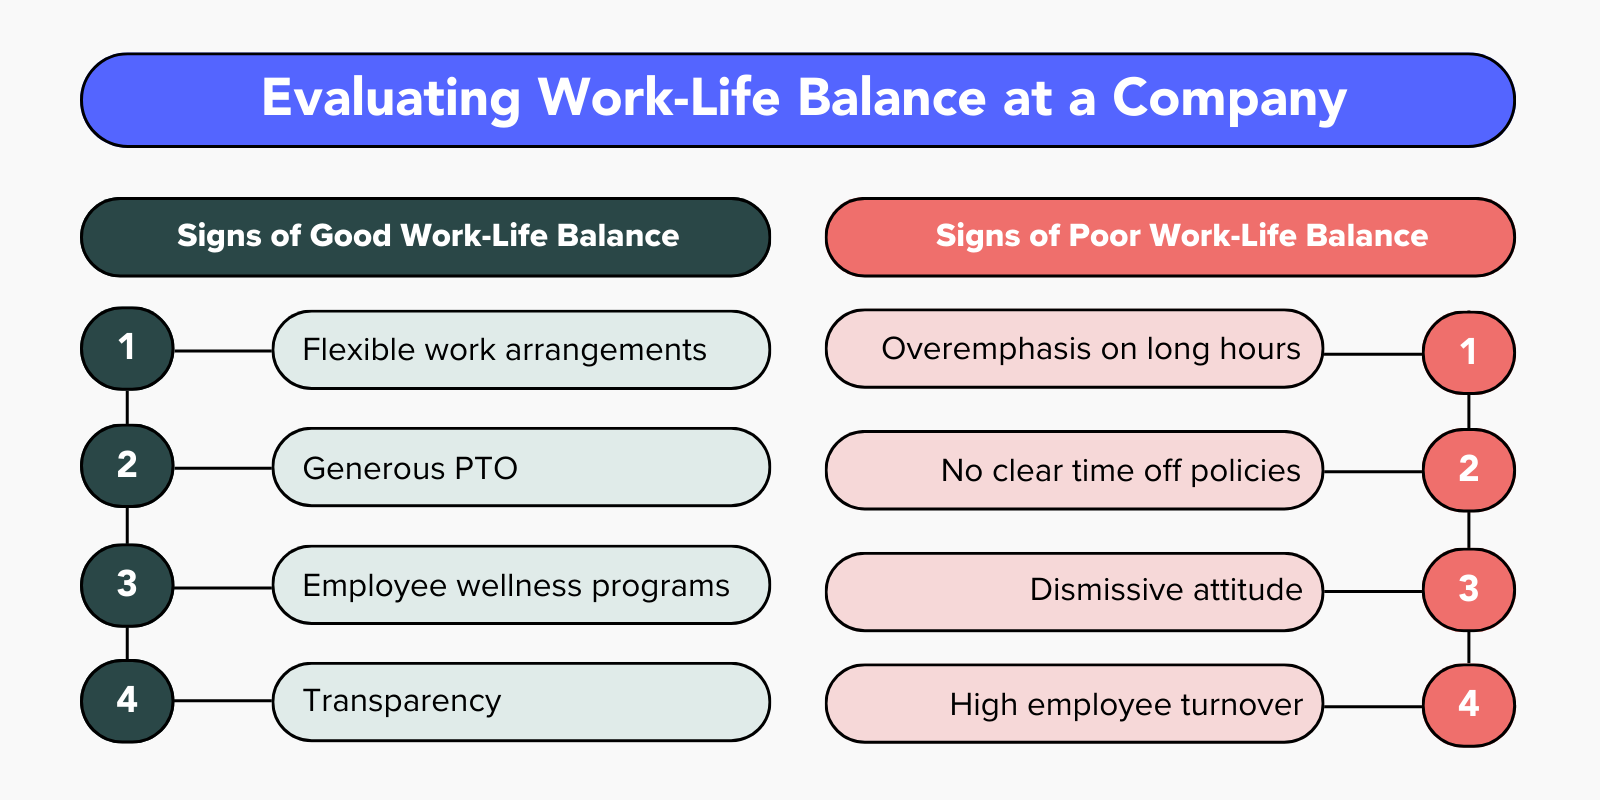 Evaluating Work Life Balance: Green Flags and Red Flags